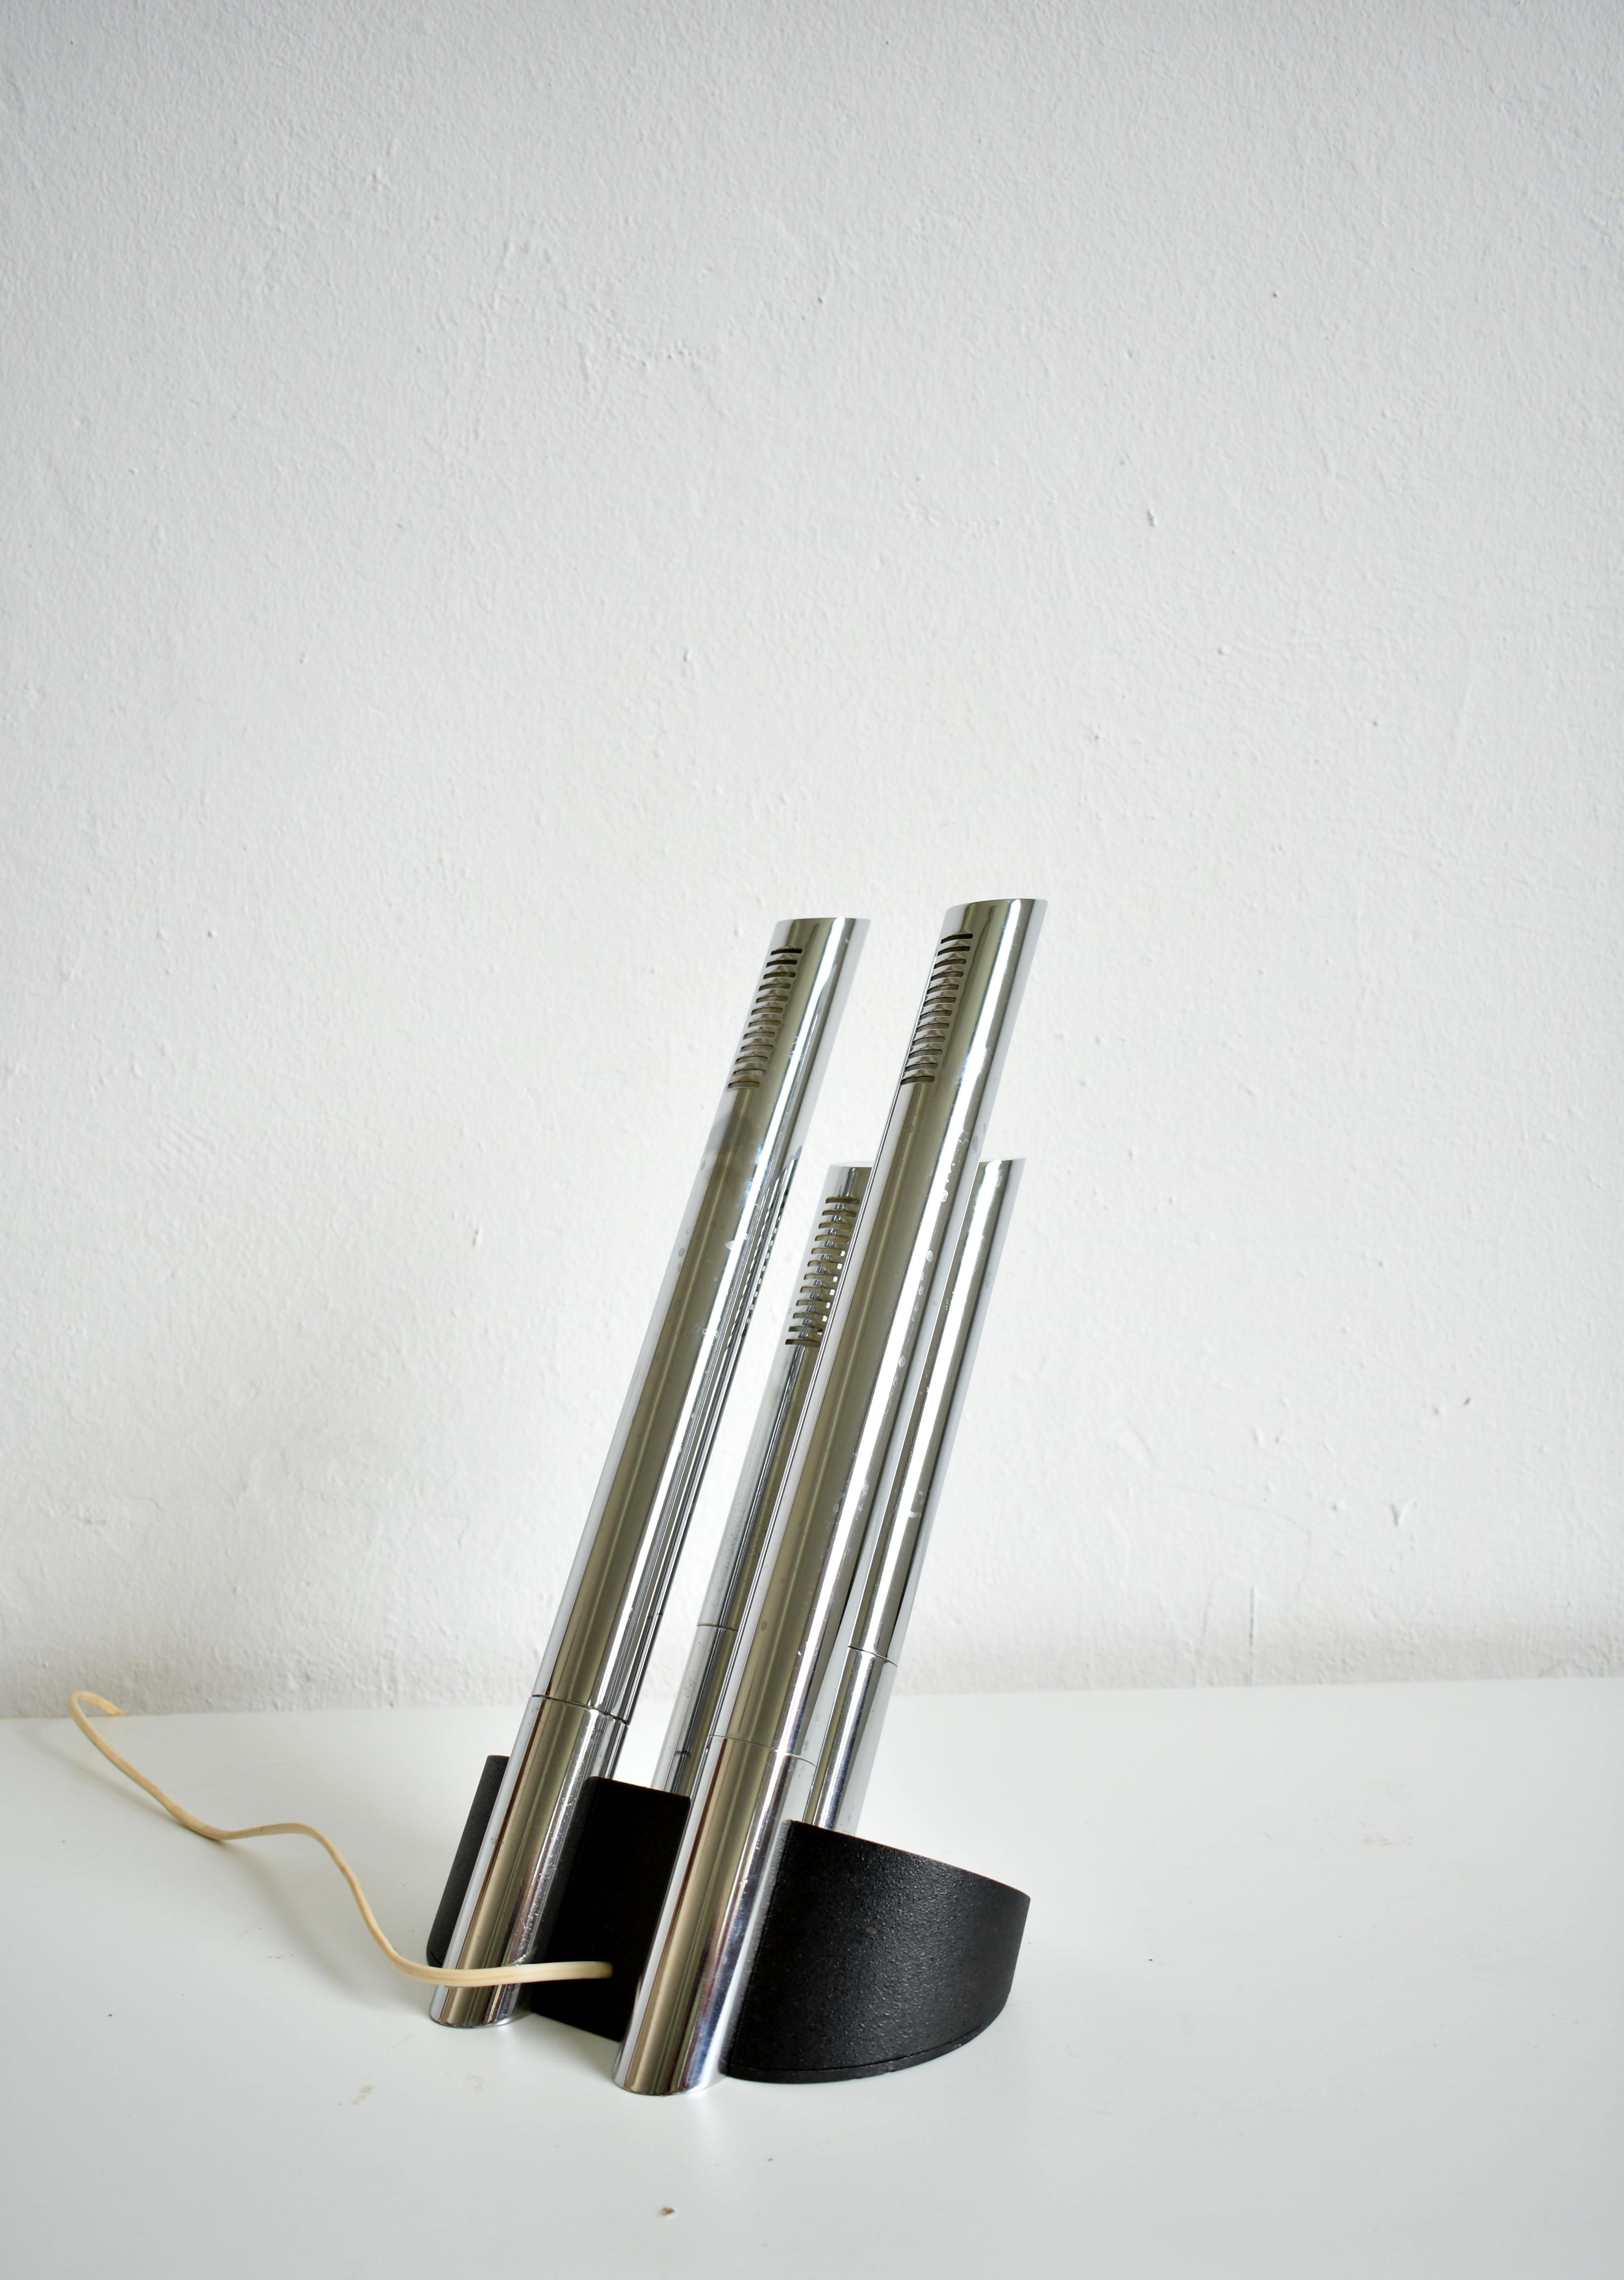 Italian Table Lamp Designed by Mario Faggian, Model T443, Produced by Luci, Italy, 1970s